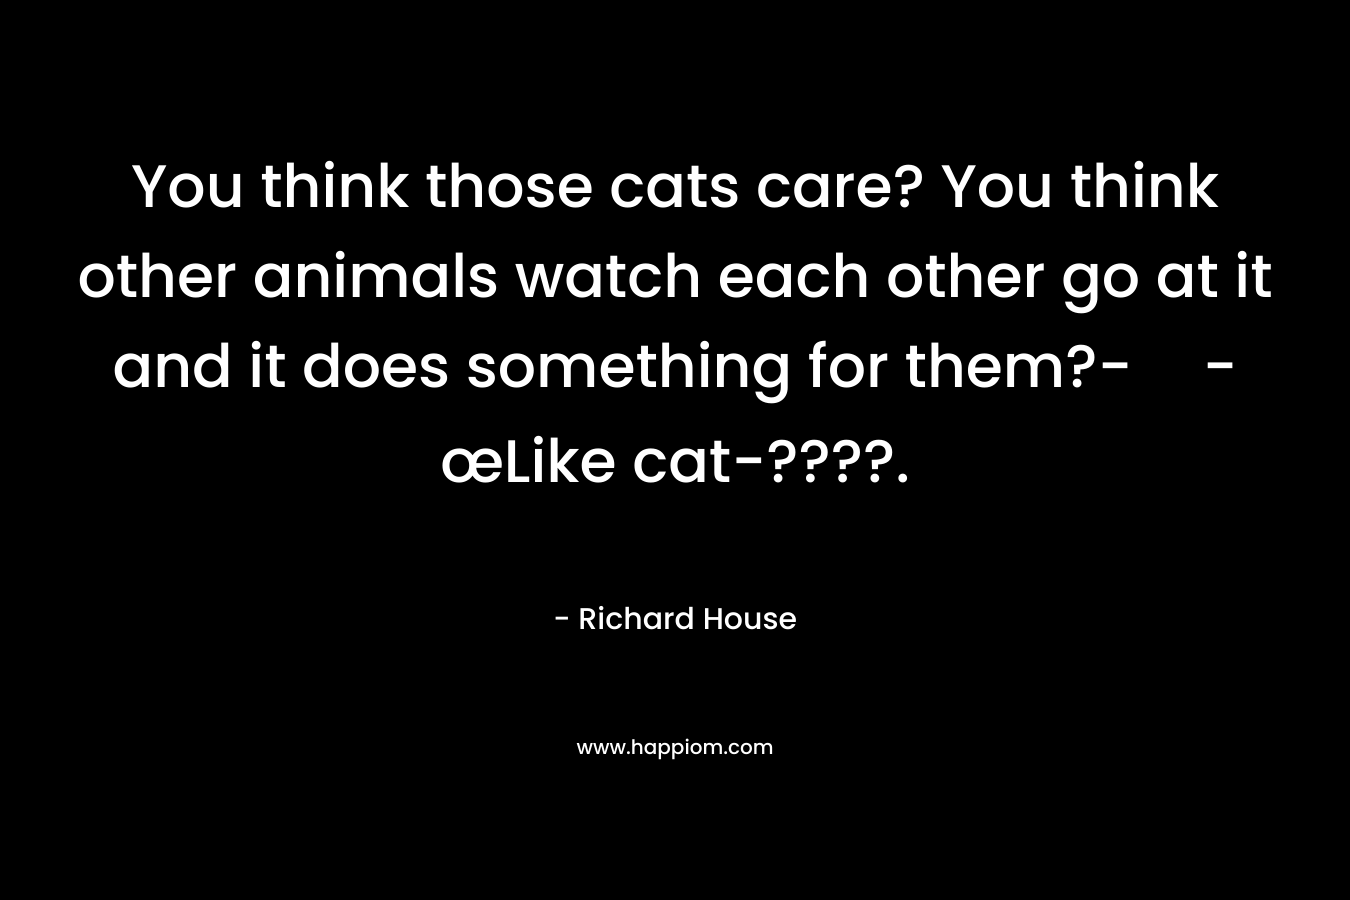 You think those cats care? You think other animals watch each other go at it and it does something for them?--œLike cat-????. – Richard House